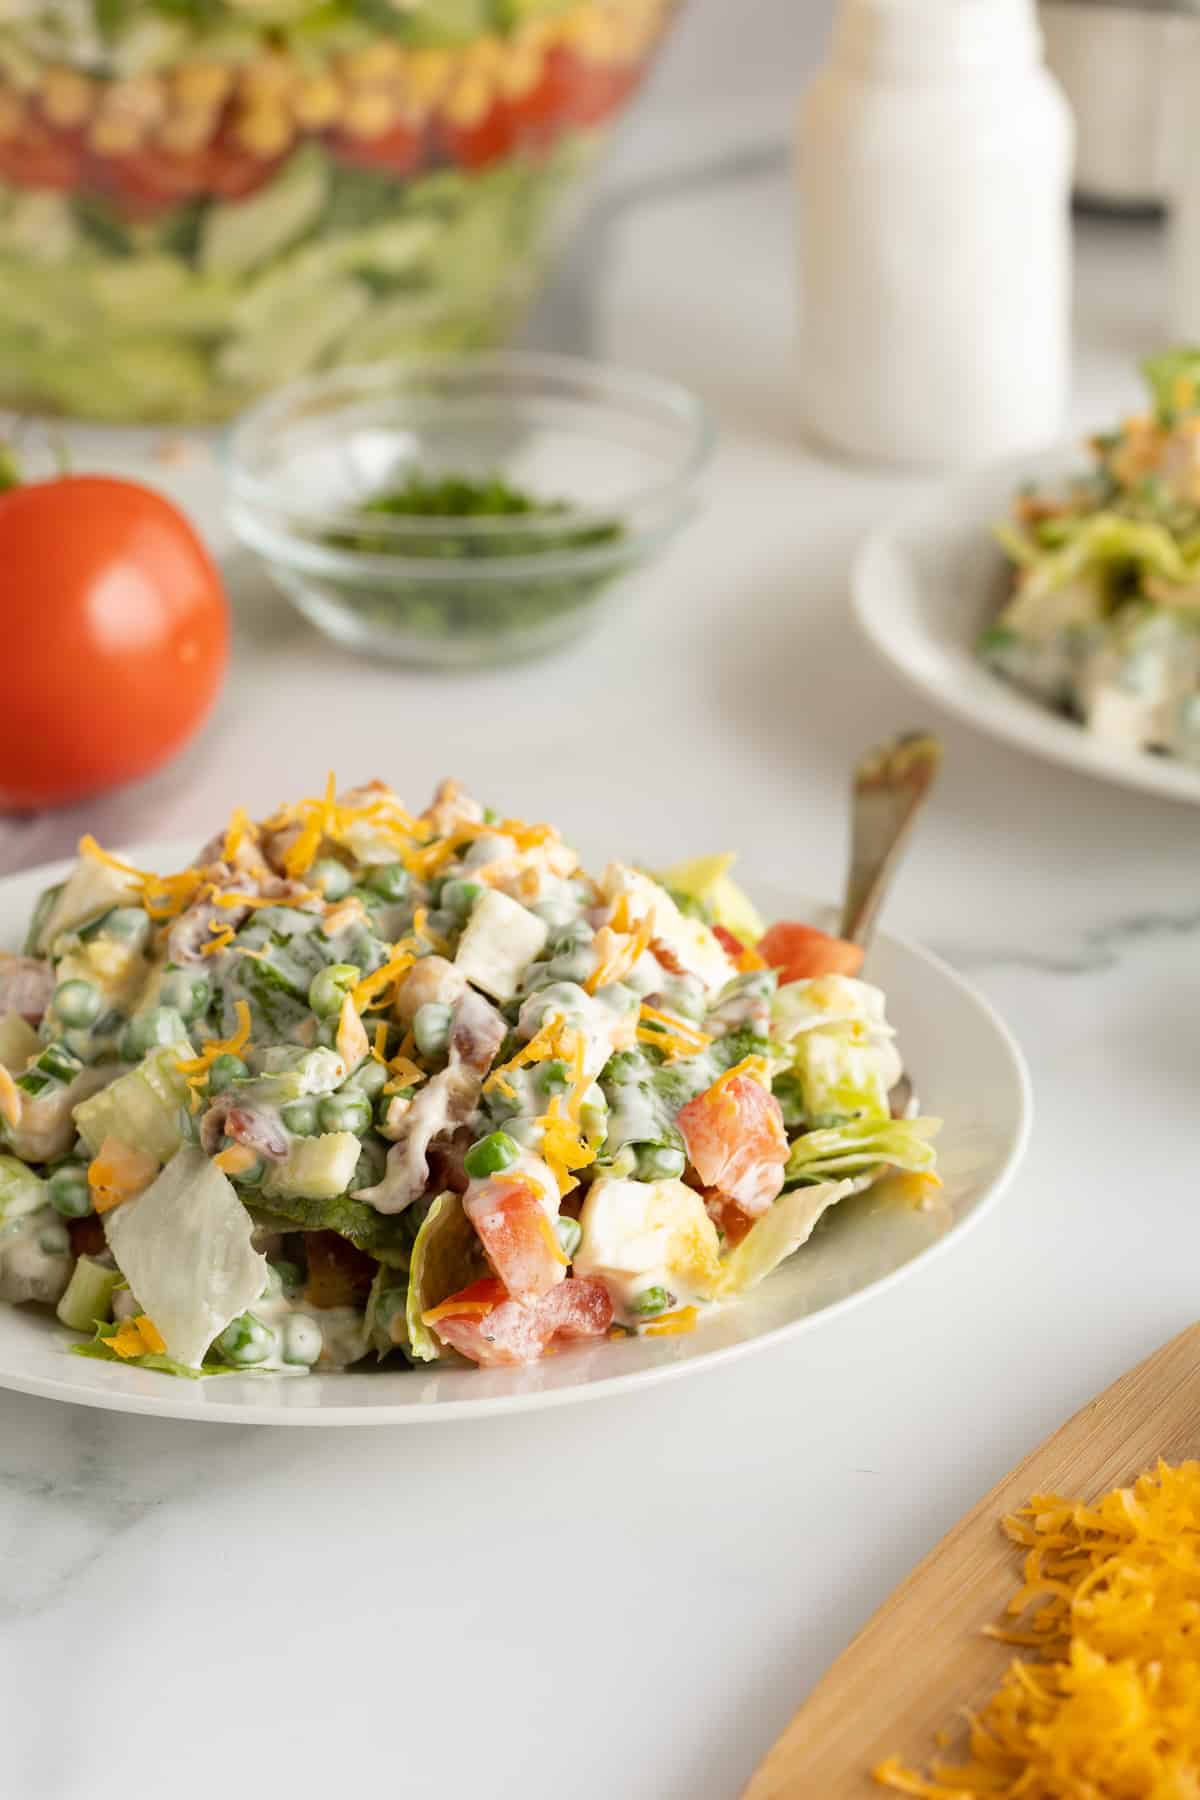 A serving of salad with creamy dressing on a plate with a fork.